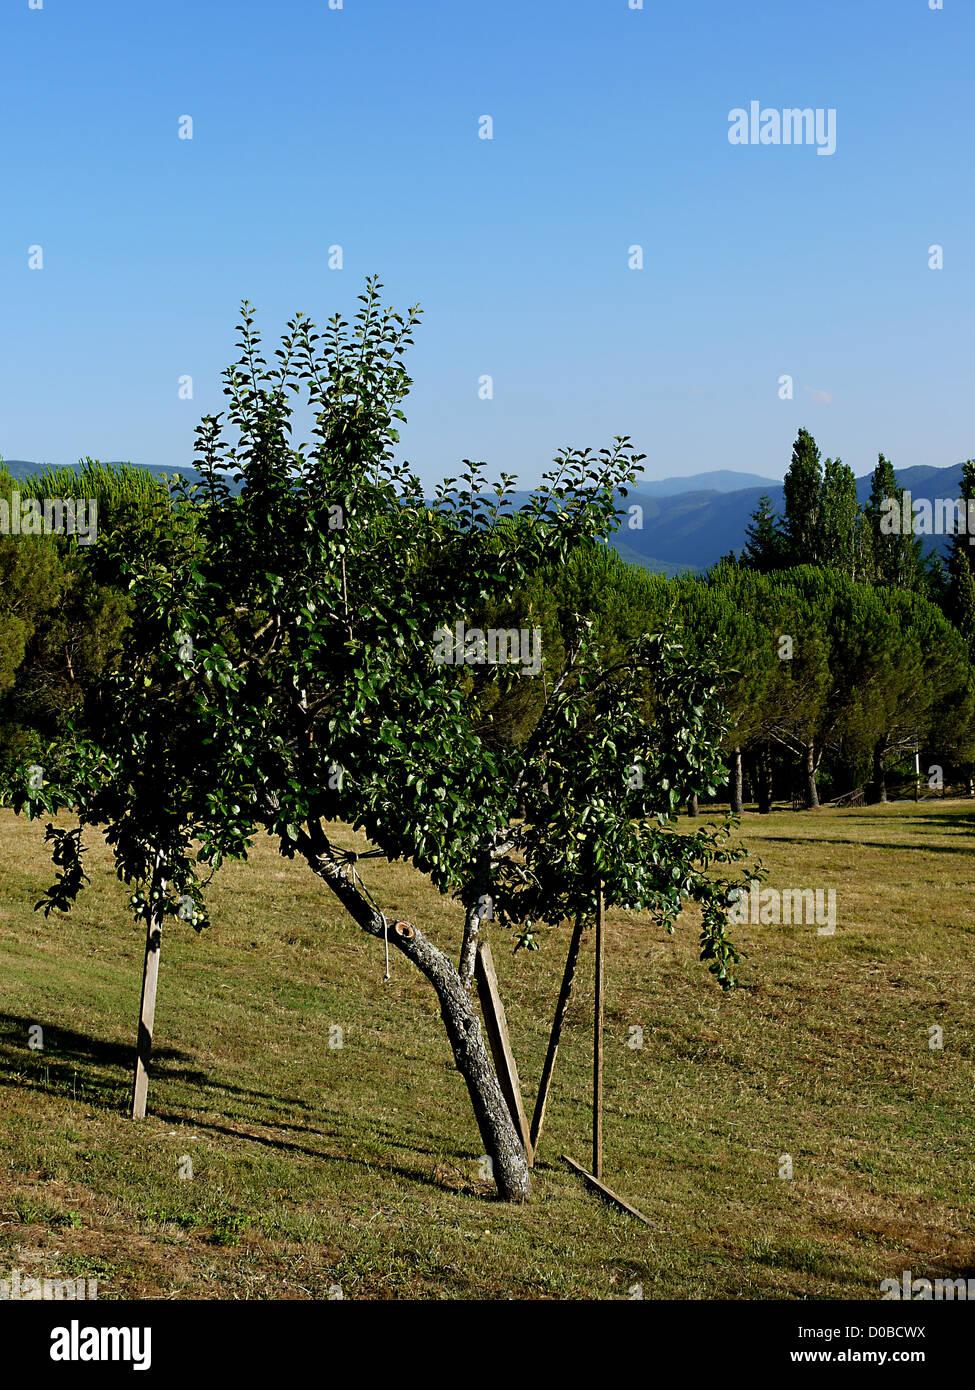 Old Olive tree propped up with stakes in the Tuscan Hills of Italy Stock Photo